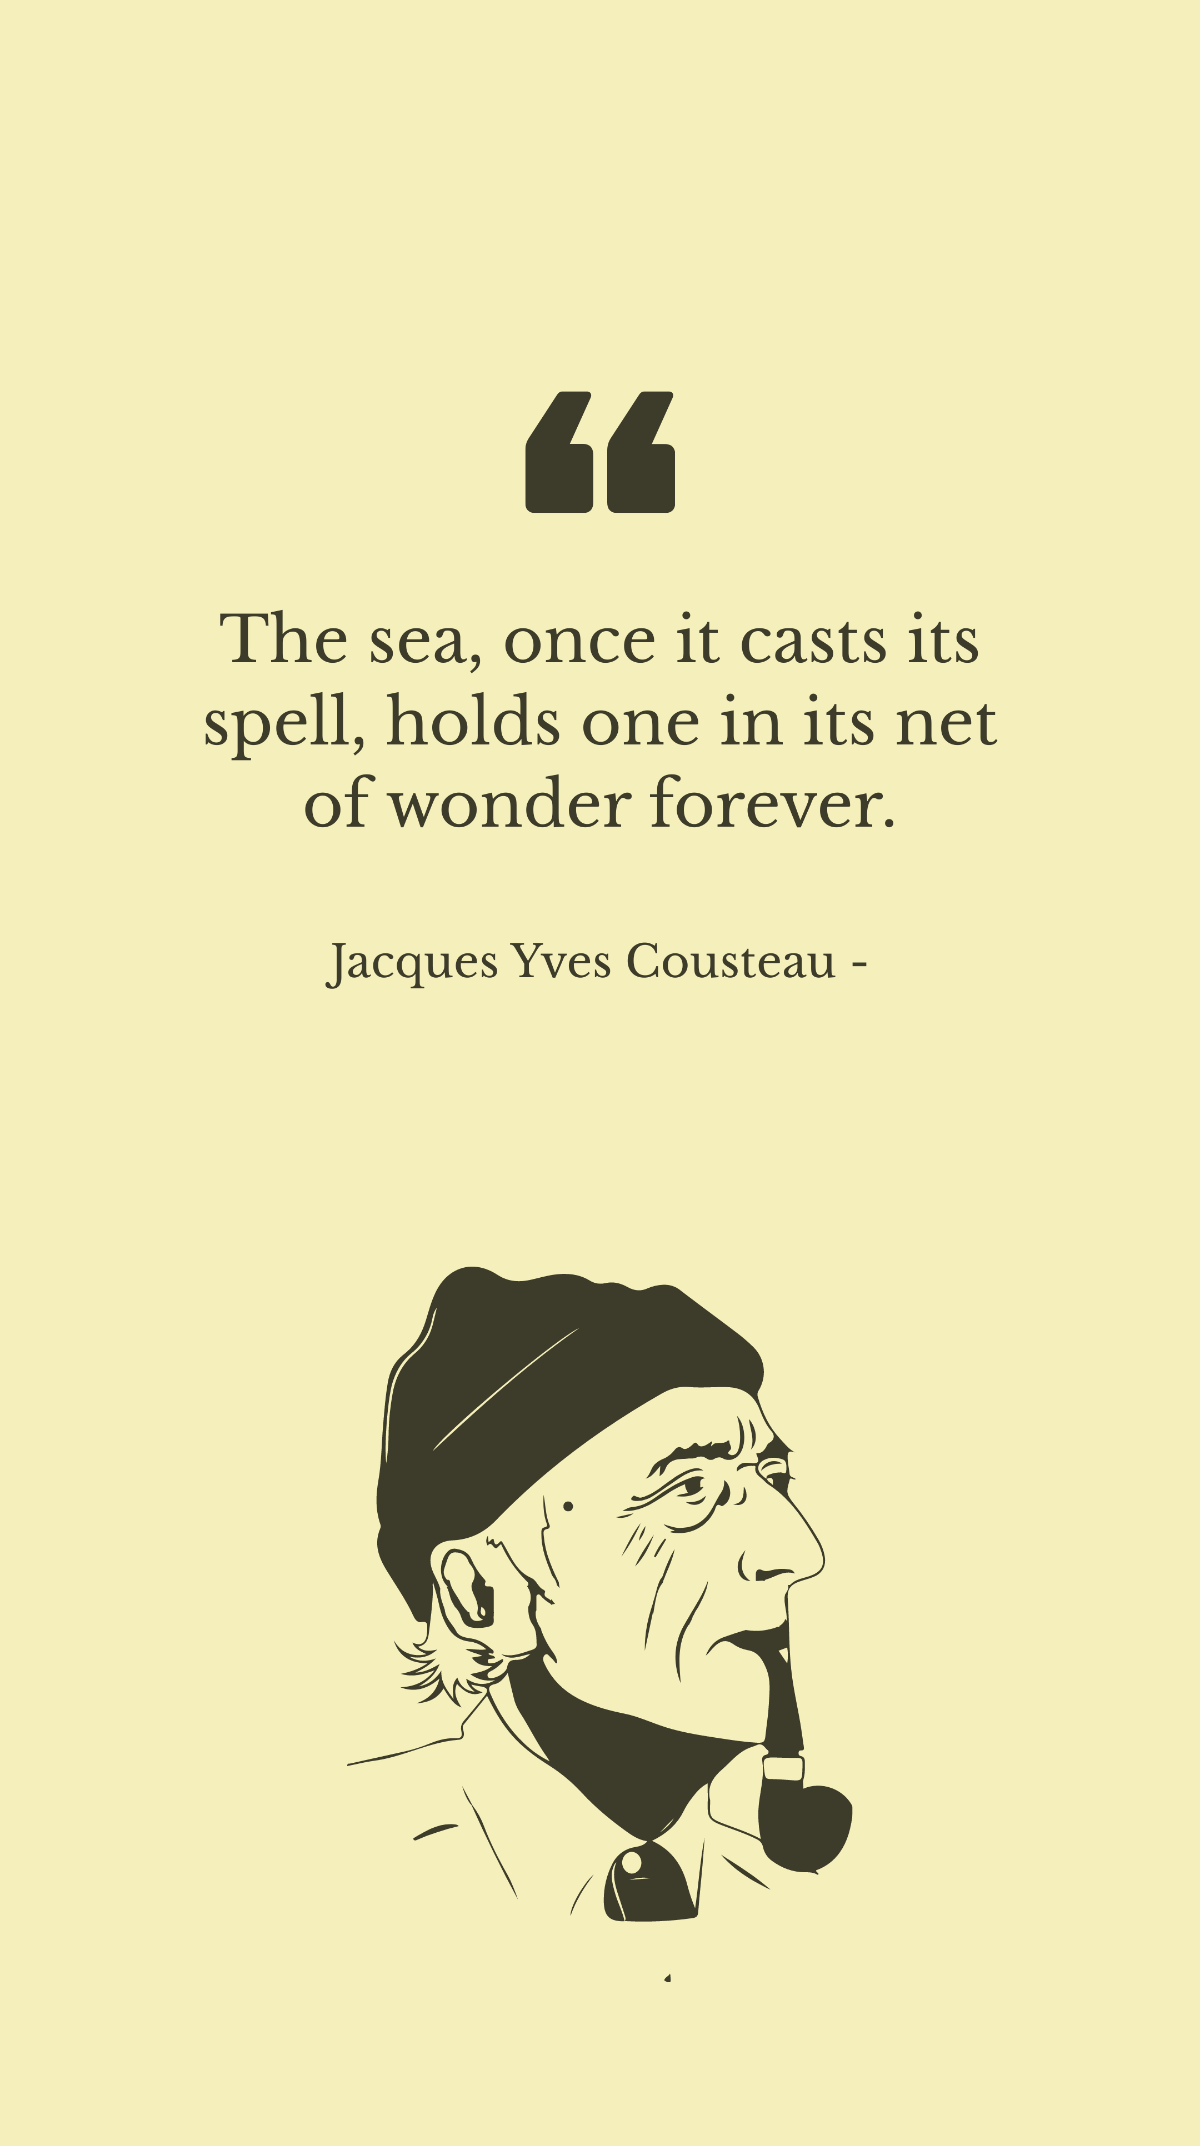 Jacques Yves Cousteau - The sea, once it casts its spell, holds one in its net of wonder forever. Template